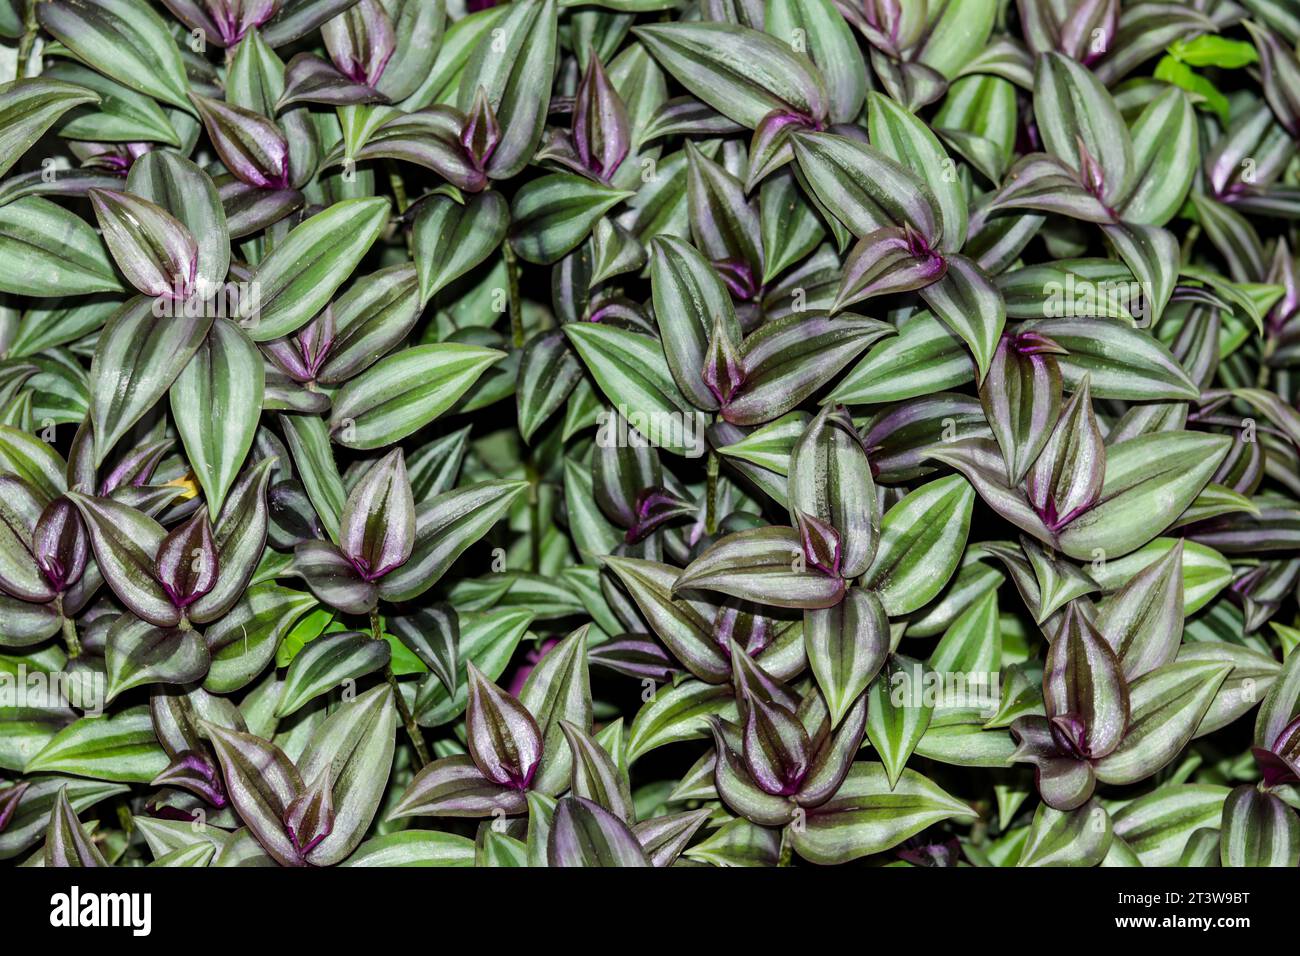 Inchplant is equally popular for pretty colors, wandering, creeping growth pattern Stock Photo